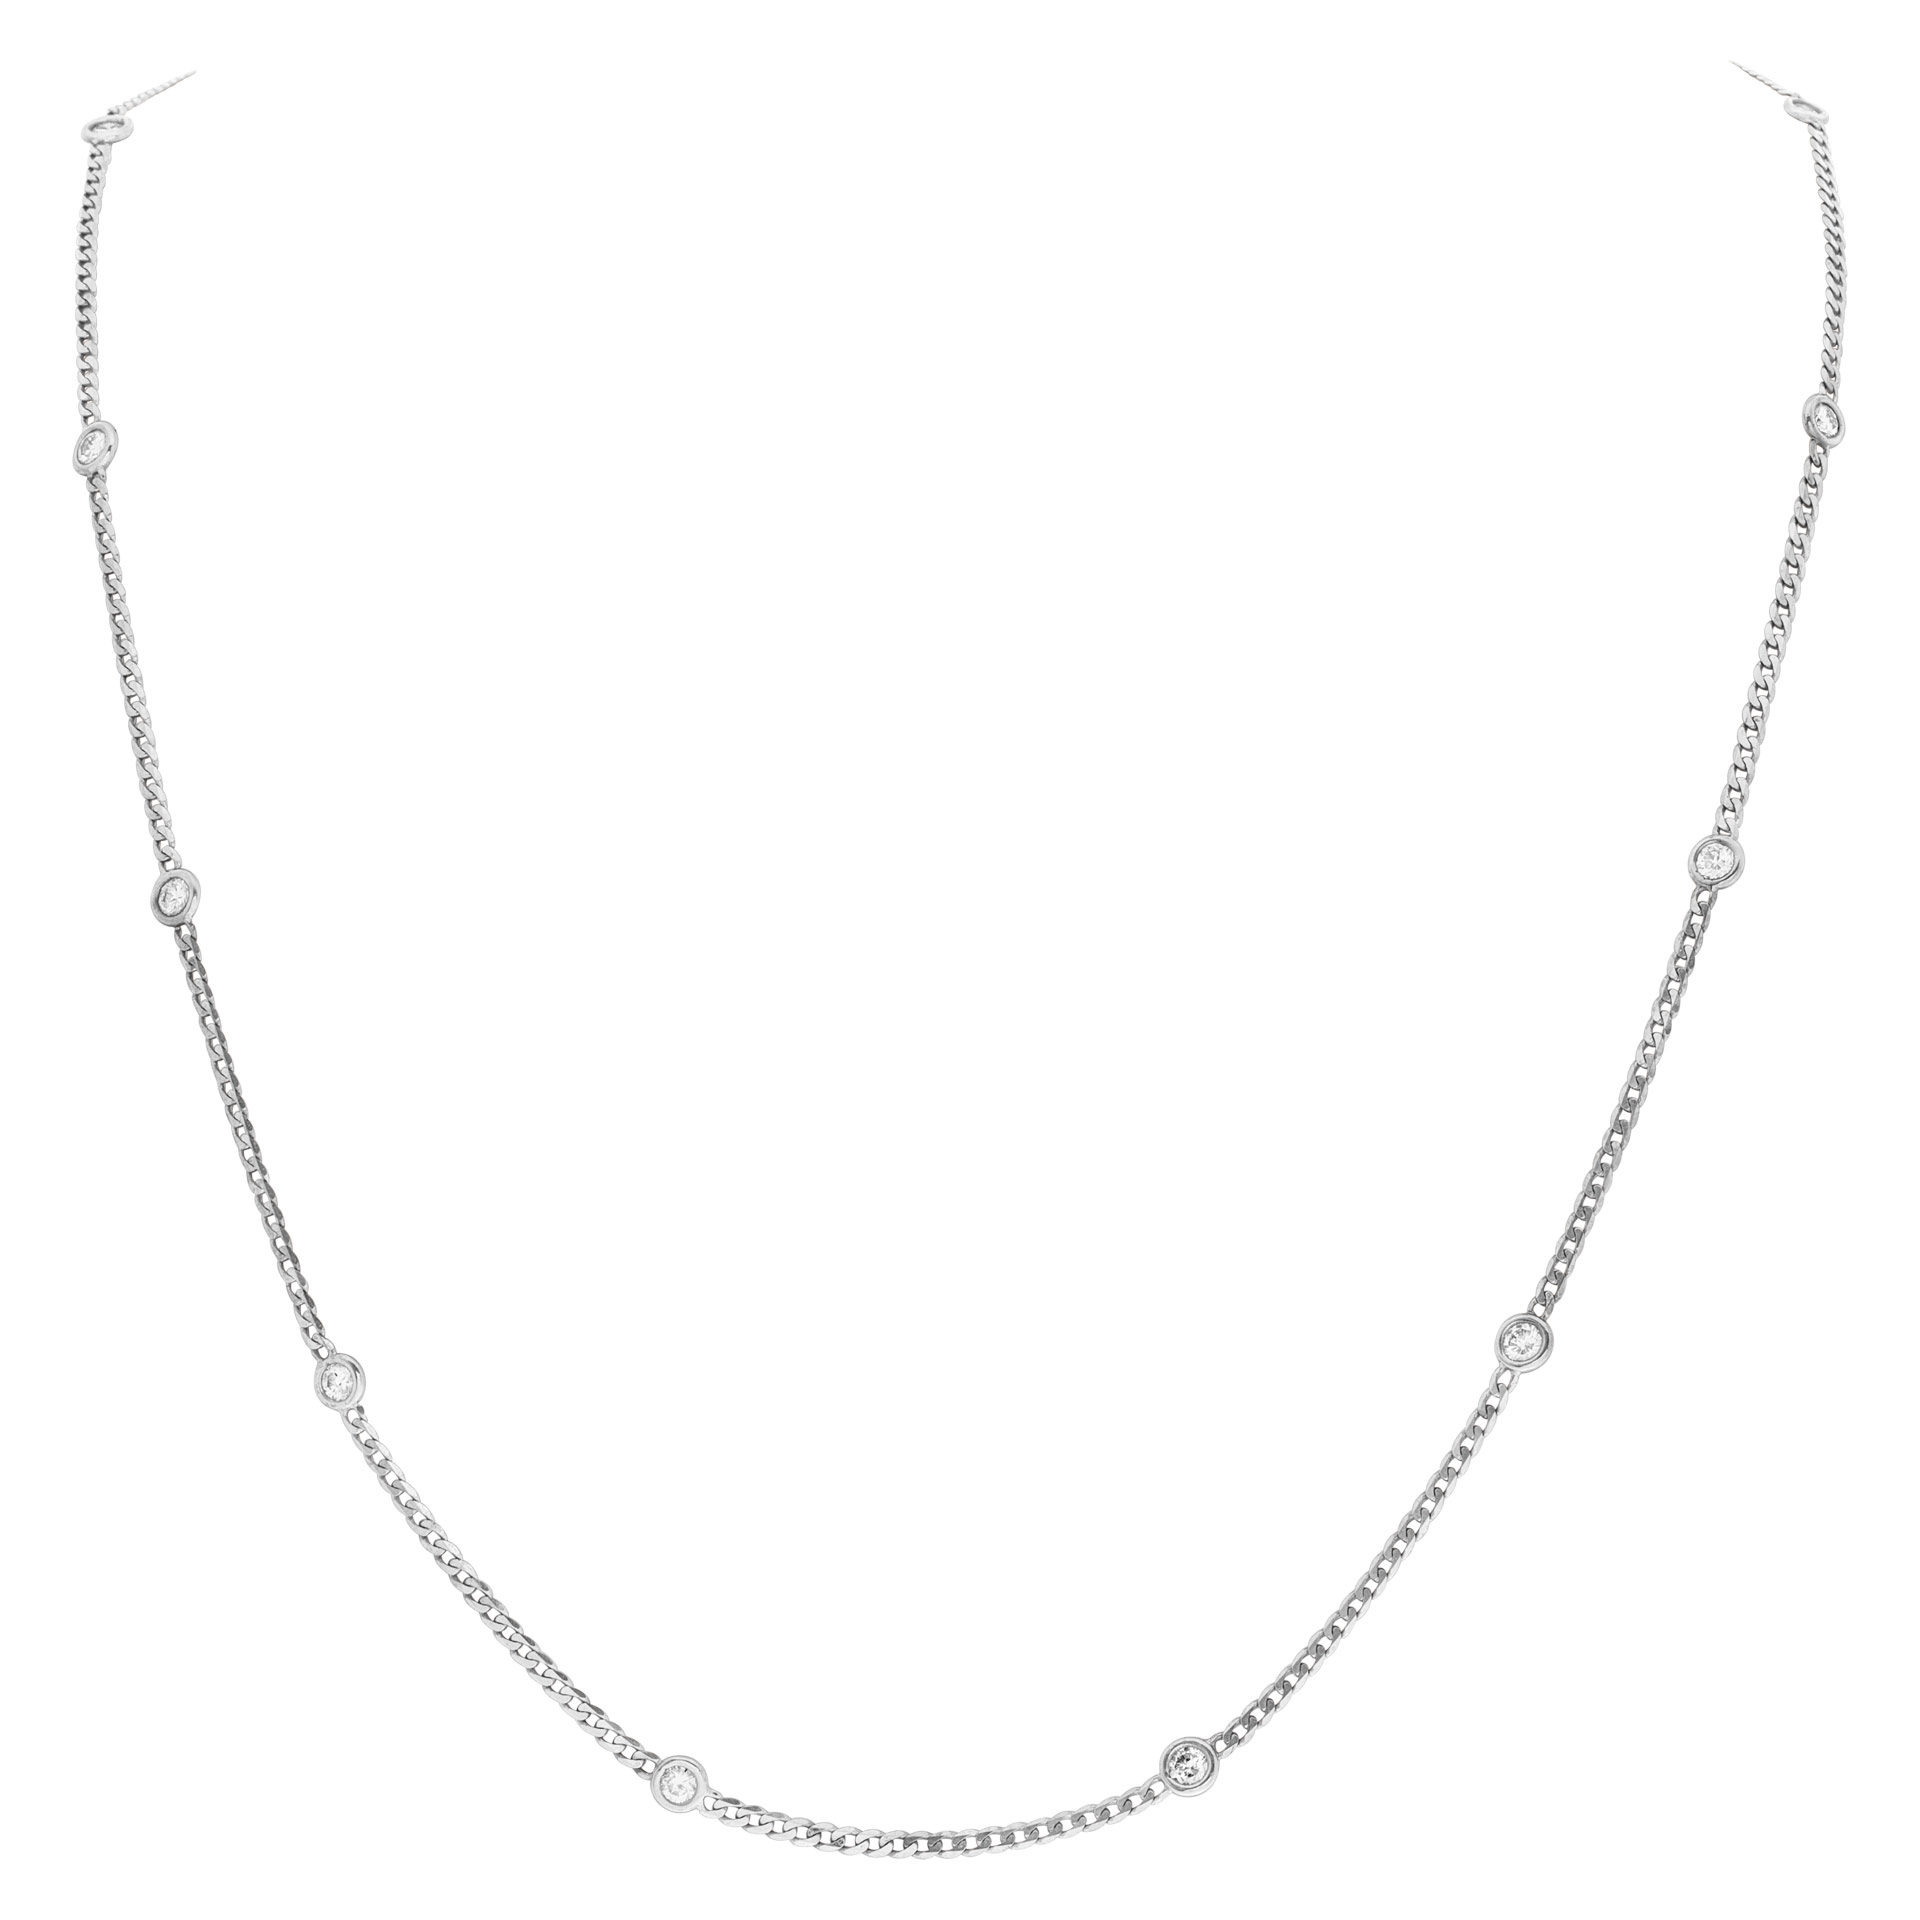 "Diamonds by the Yard" chain/necklace in 14k white gold. With 15 bezeled round brilliant cut diamonds, total approx. weight:1.66 carat. 24". image 1